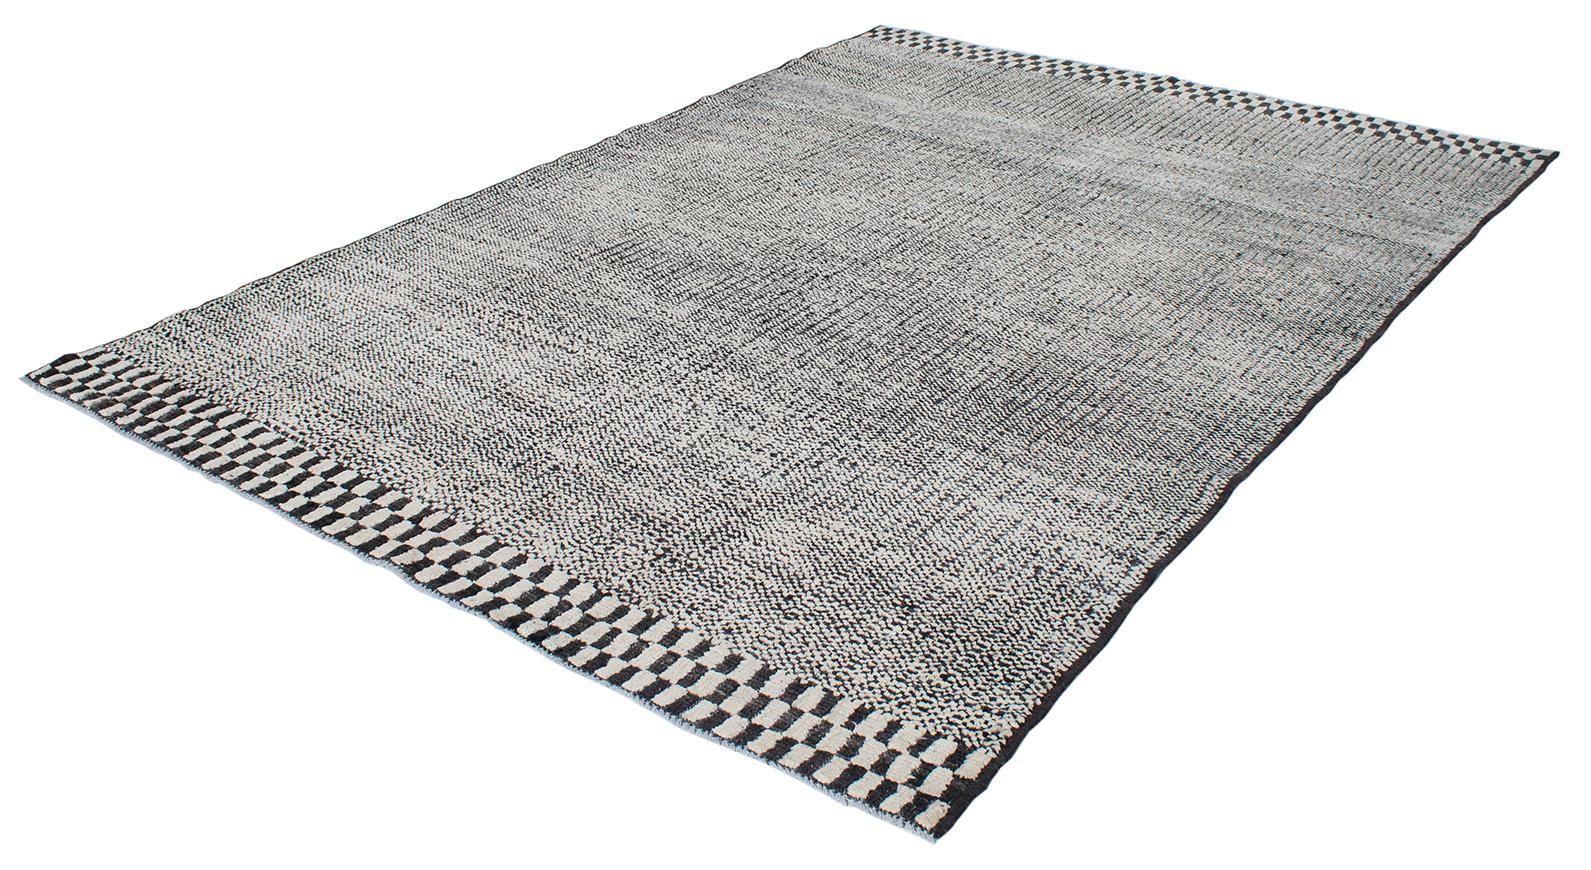 Beautiful modern rug that is hand-knotted in wool and cotton. It has a black and white checkered border on the top and bottom with a linear field.
The rug measures 6'3